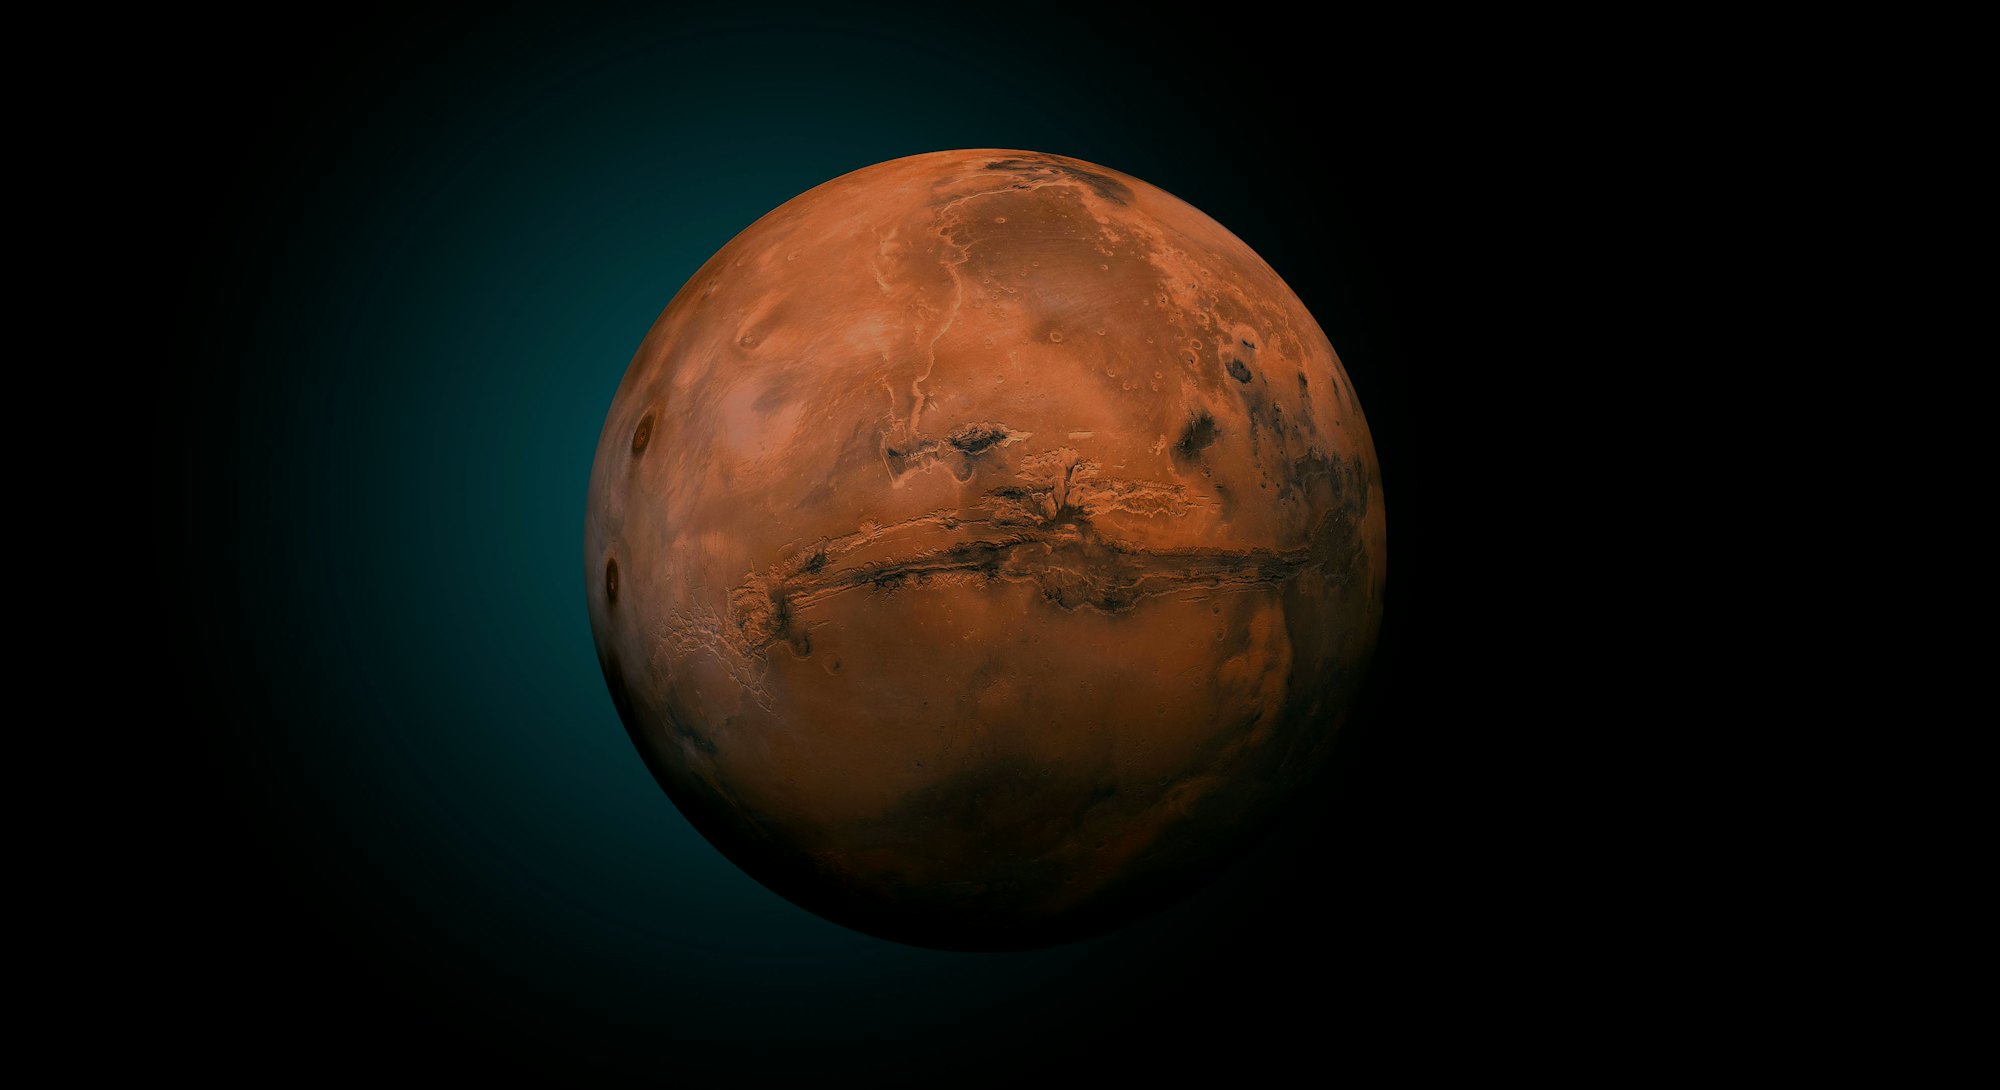 Solar System - Mars. Planet near Sun. Mars is a terrestrial planet with a thin atmosphere, having cr...